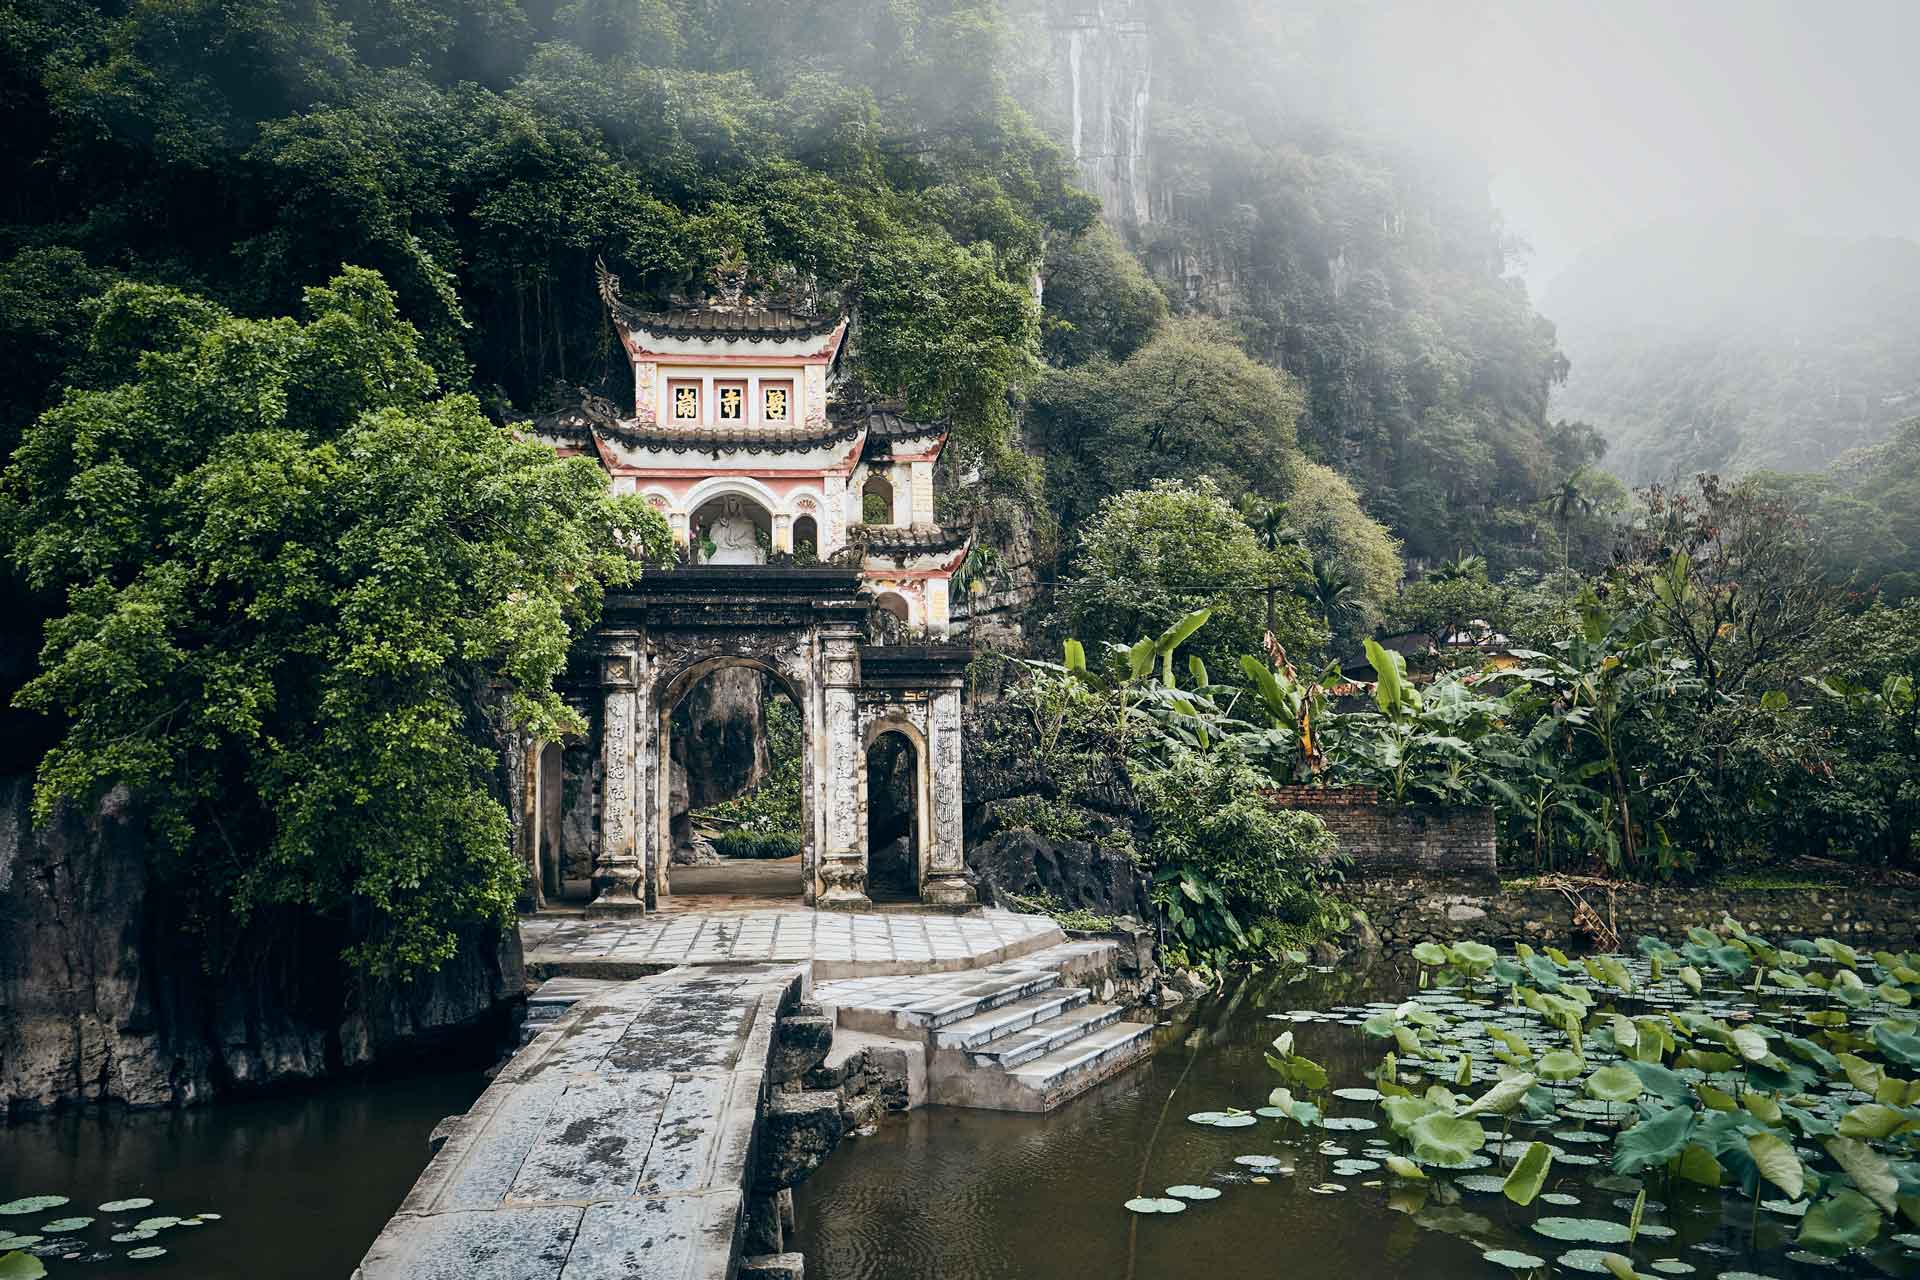 old-temple-in-the-middle-of-vietnamese-nature-Y2NZMJ3.jpg